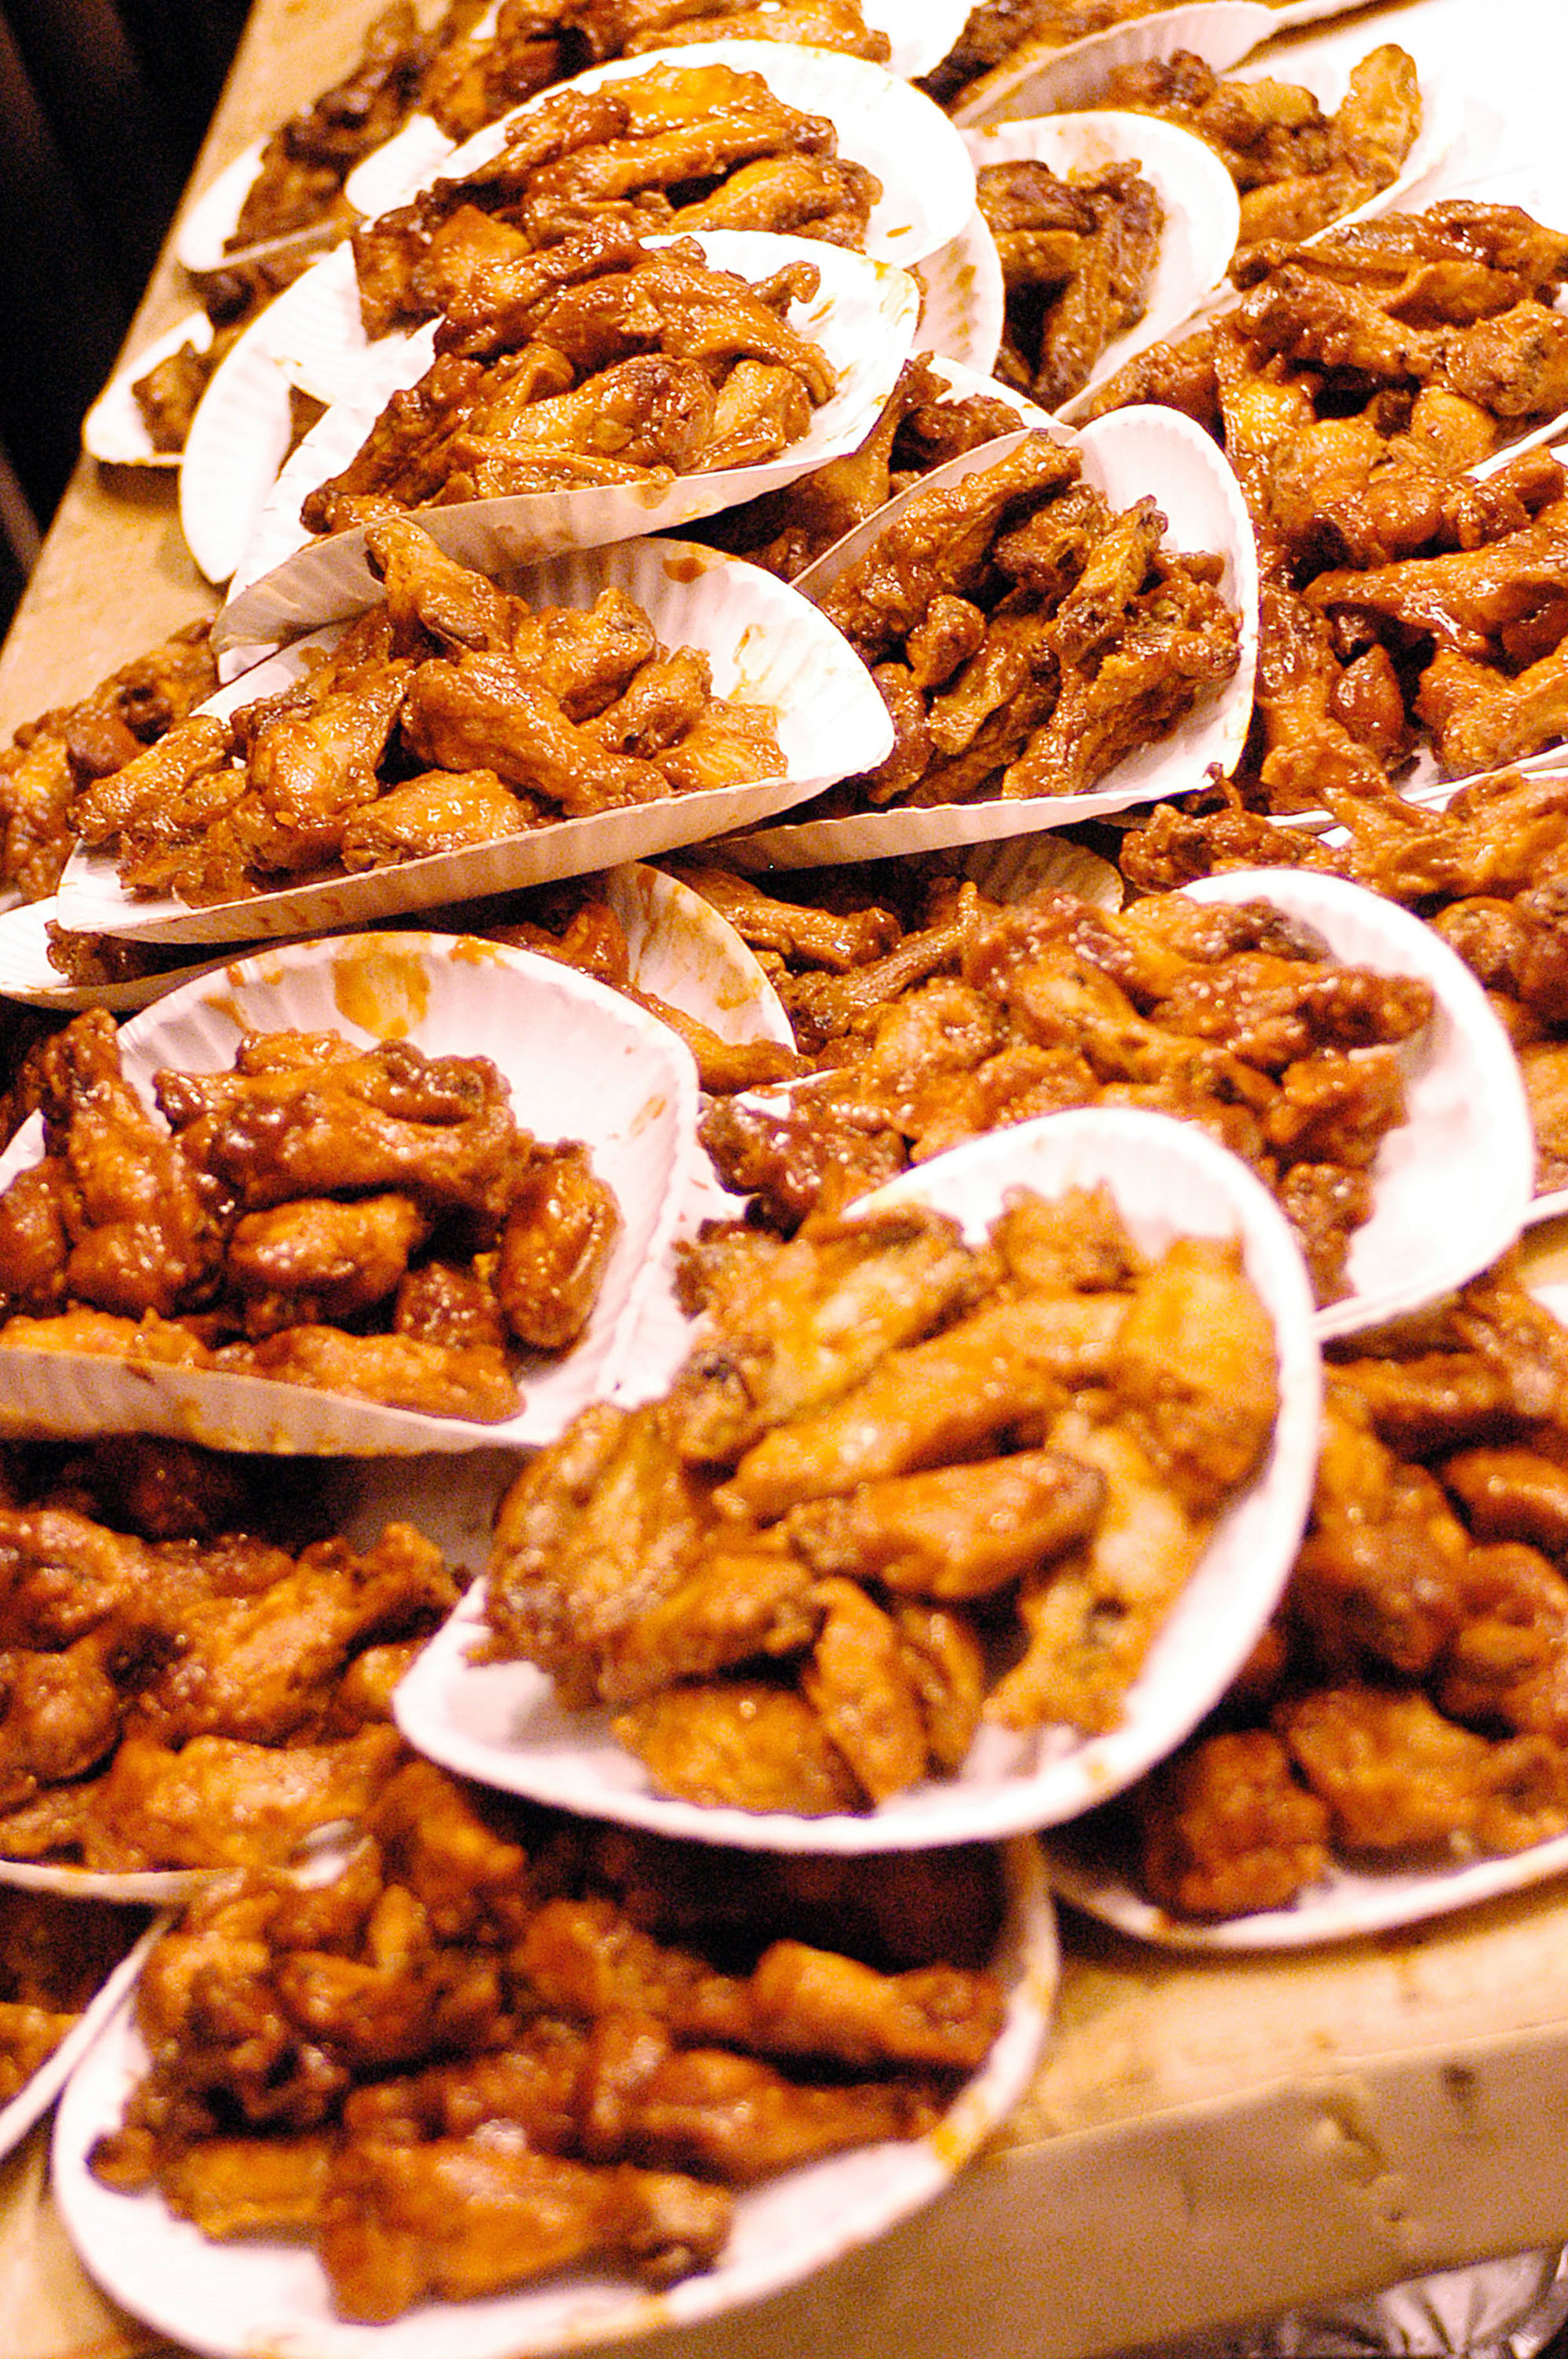 Buffalo Wings are stacked up before the competition begins at the 12th Annual Wing Bowl on January 30, 2004 in Philadelphia. (Photo by Jeff Fusco/Getty Images)